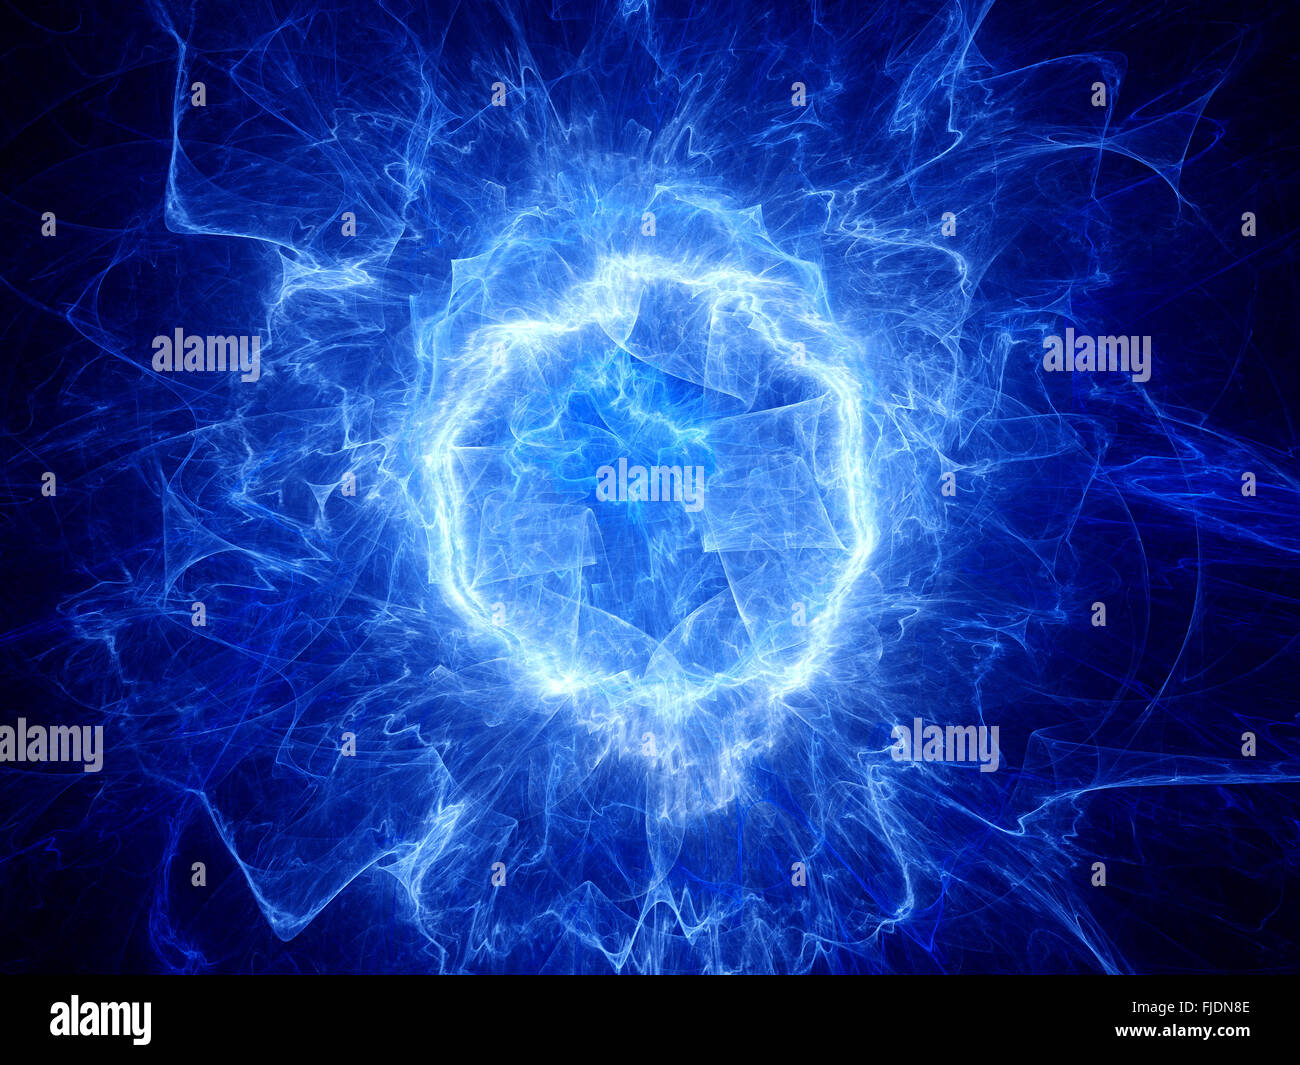 Blue glowing round shape energy field, computer generated abstract background Stock Photo